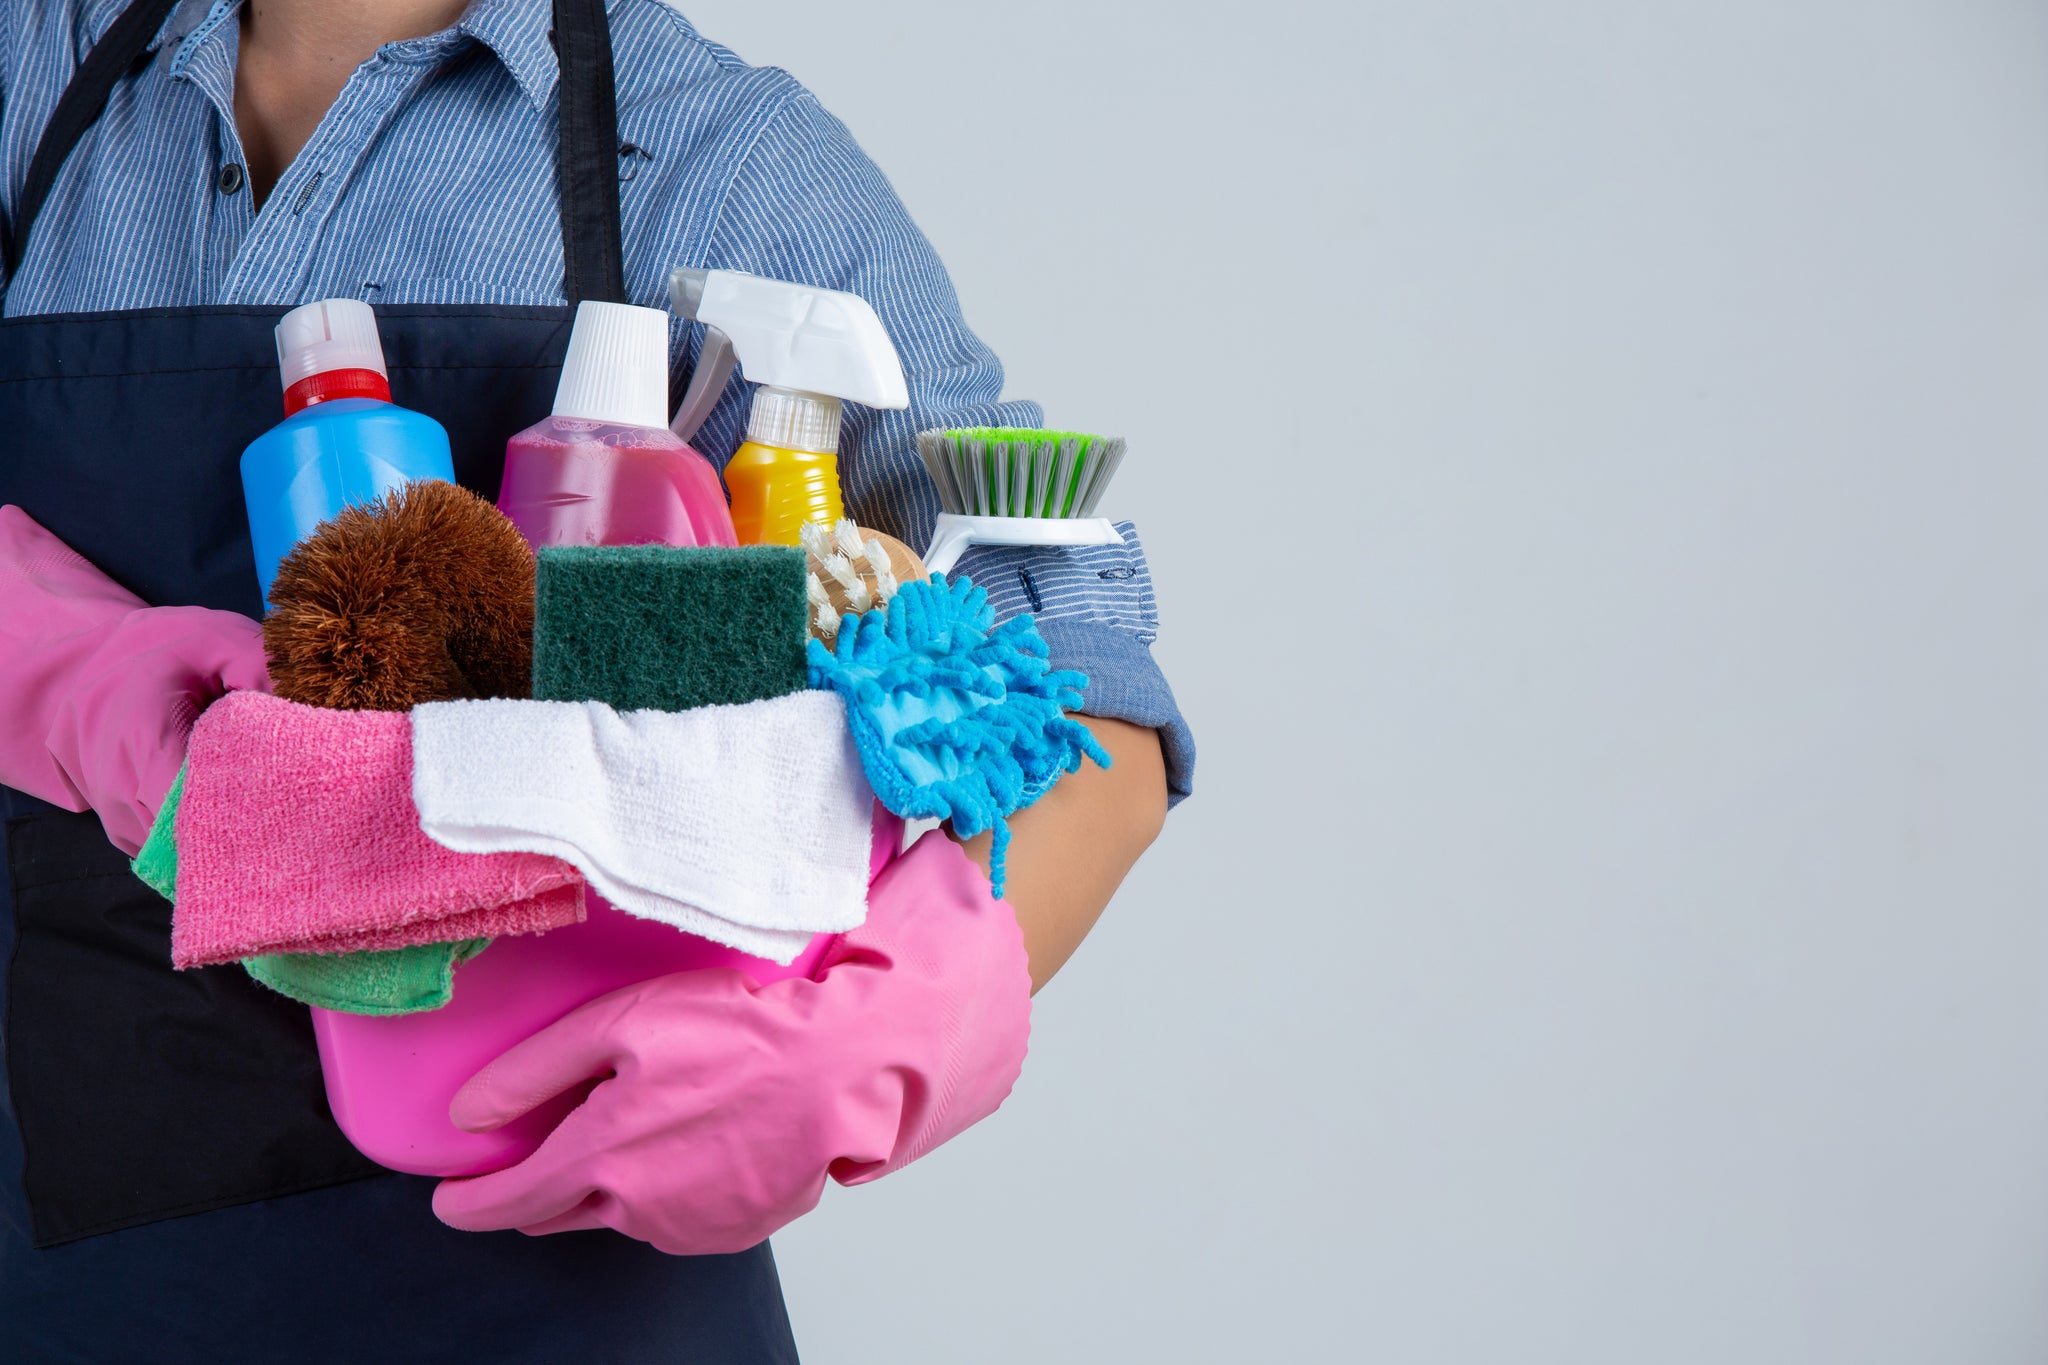 Person carrying cleaning products